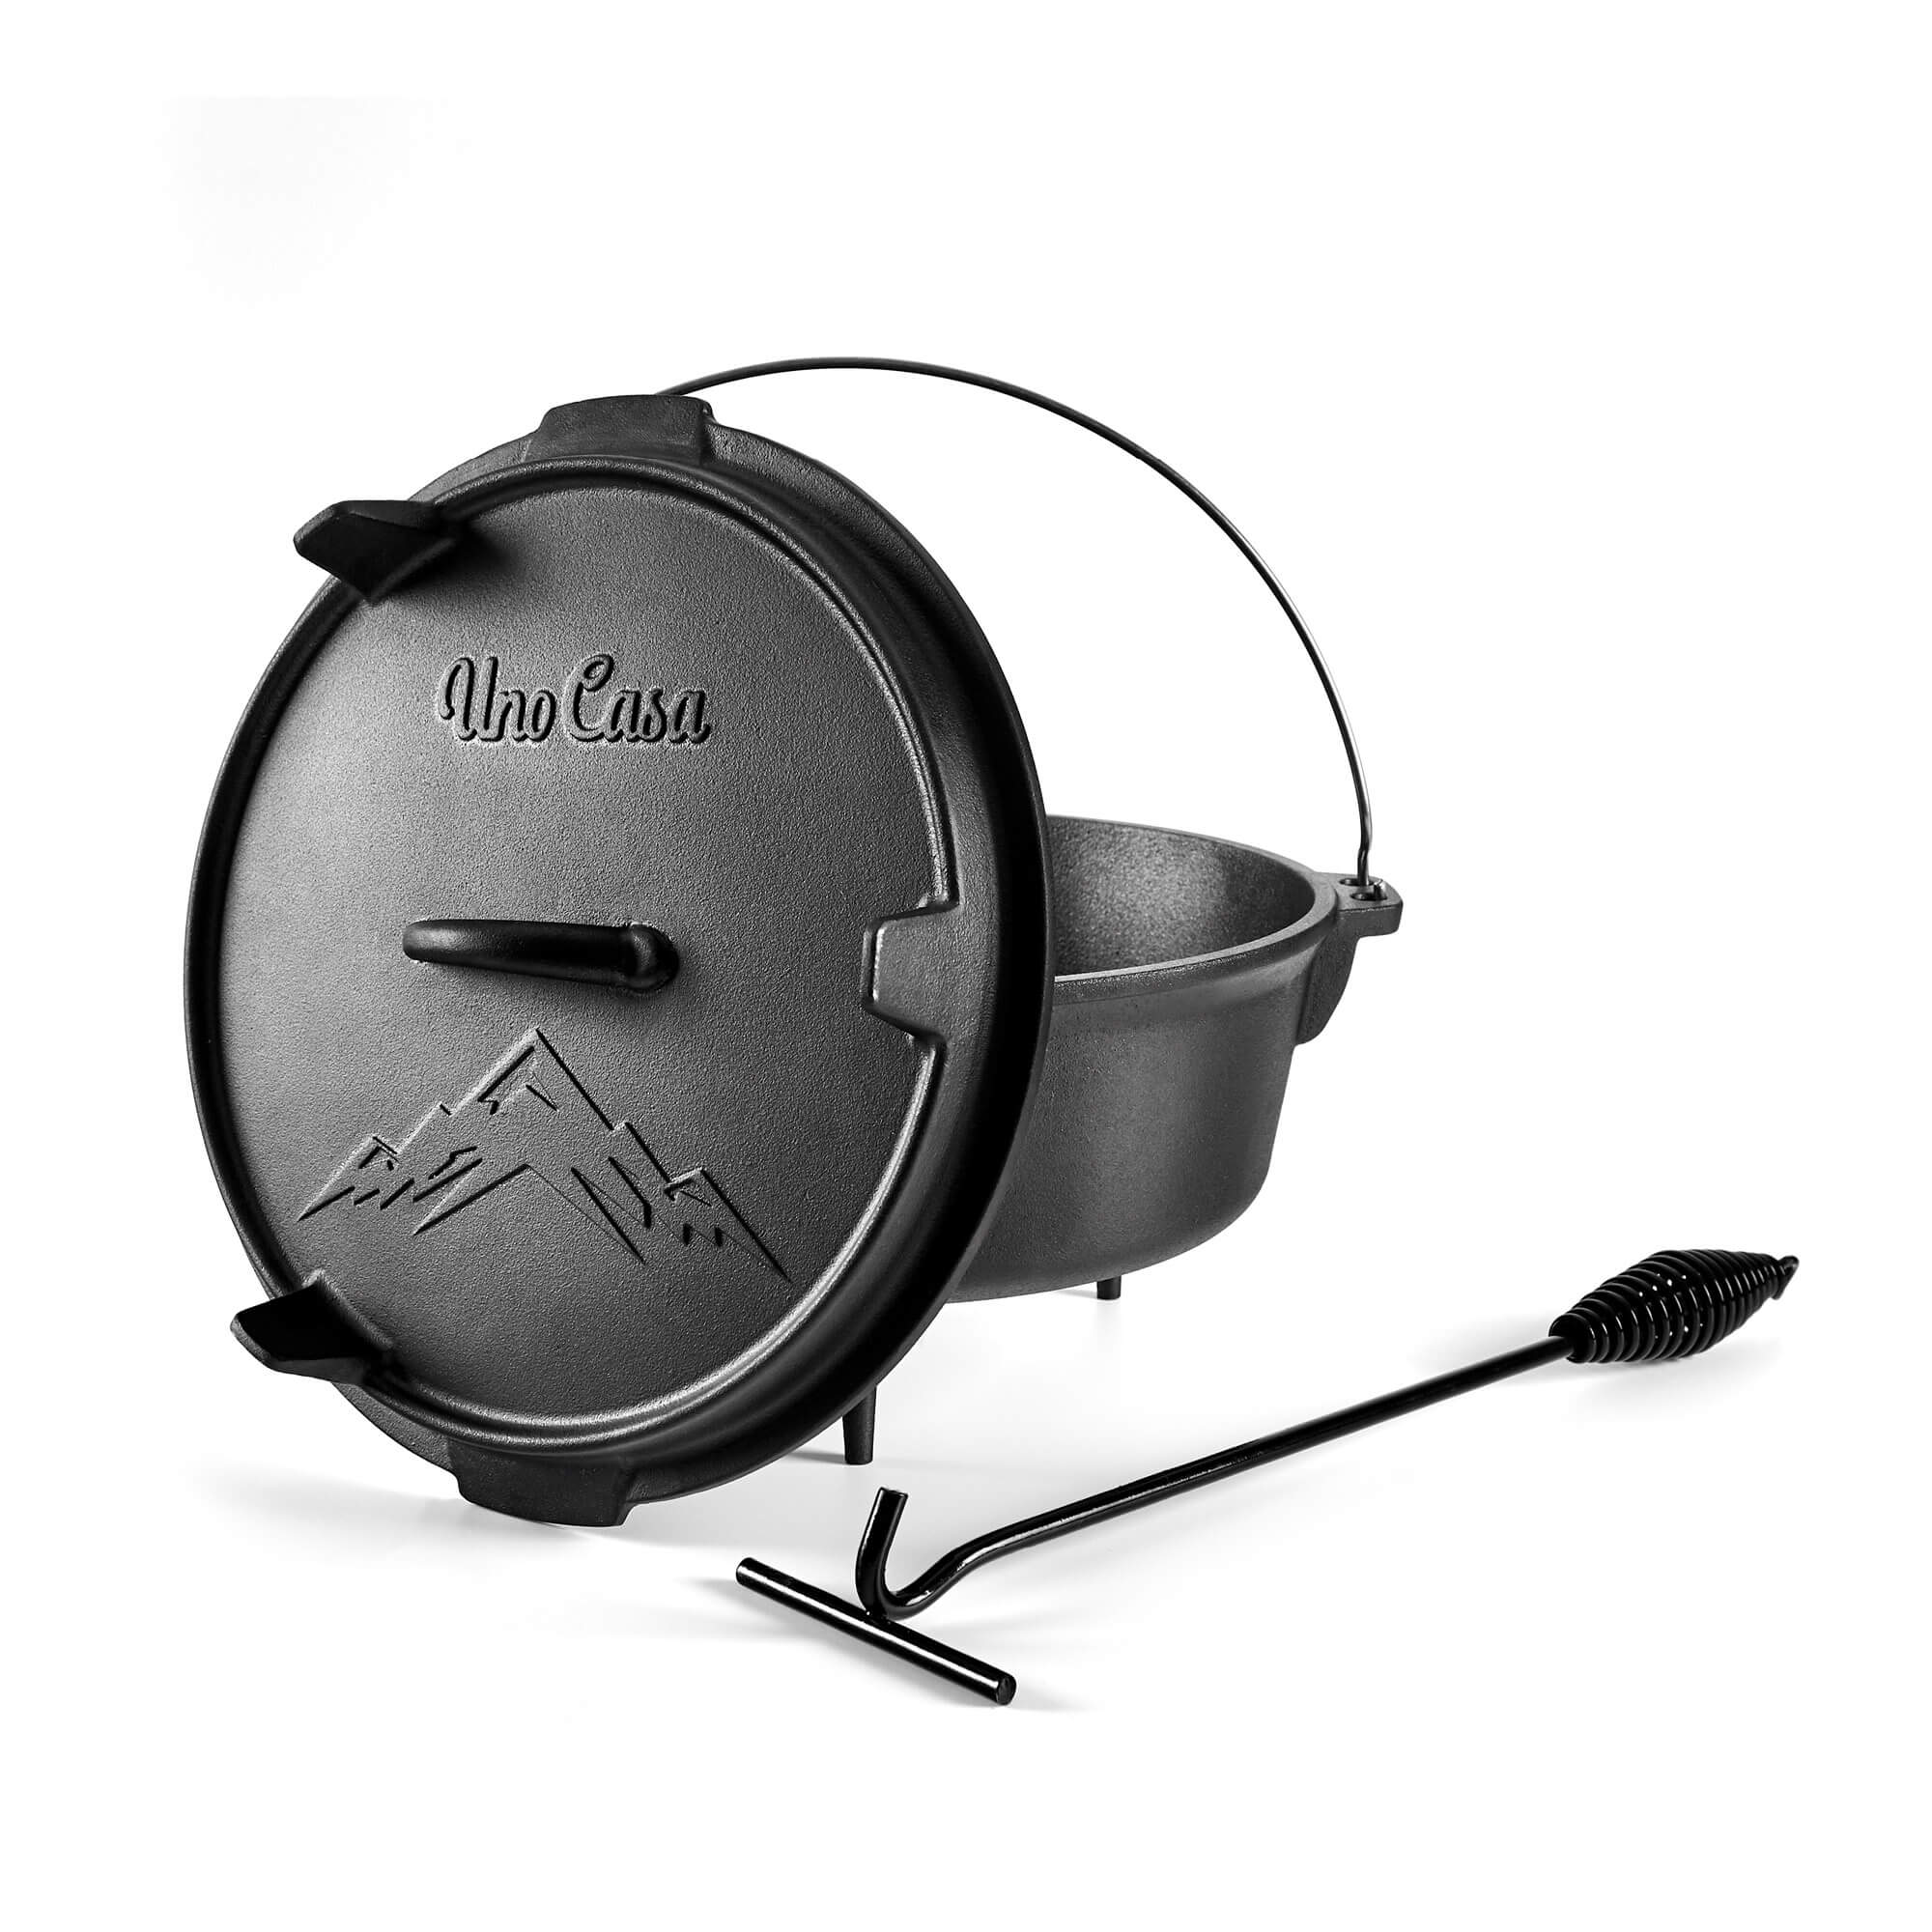 camping dutch oven